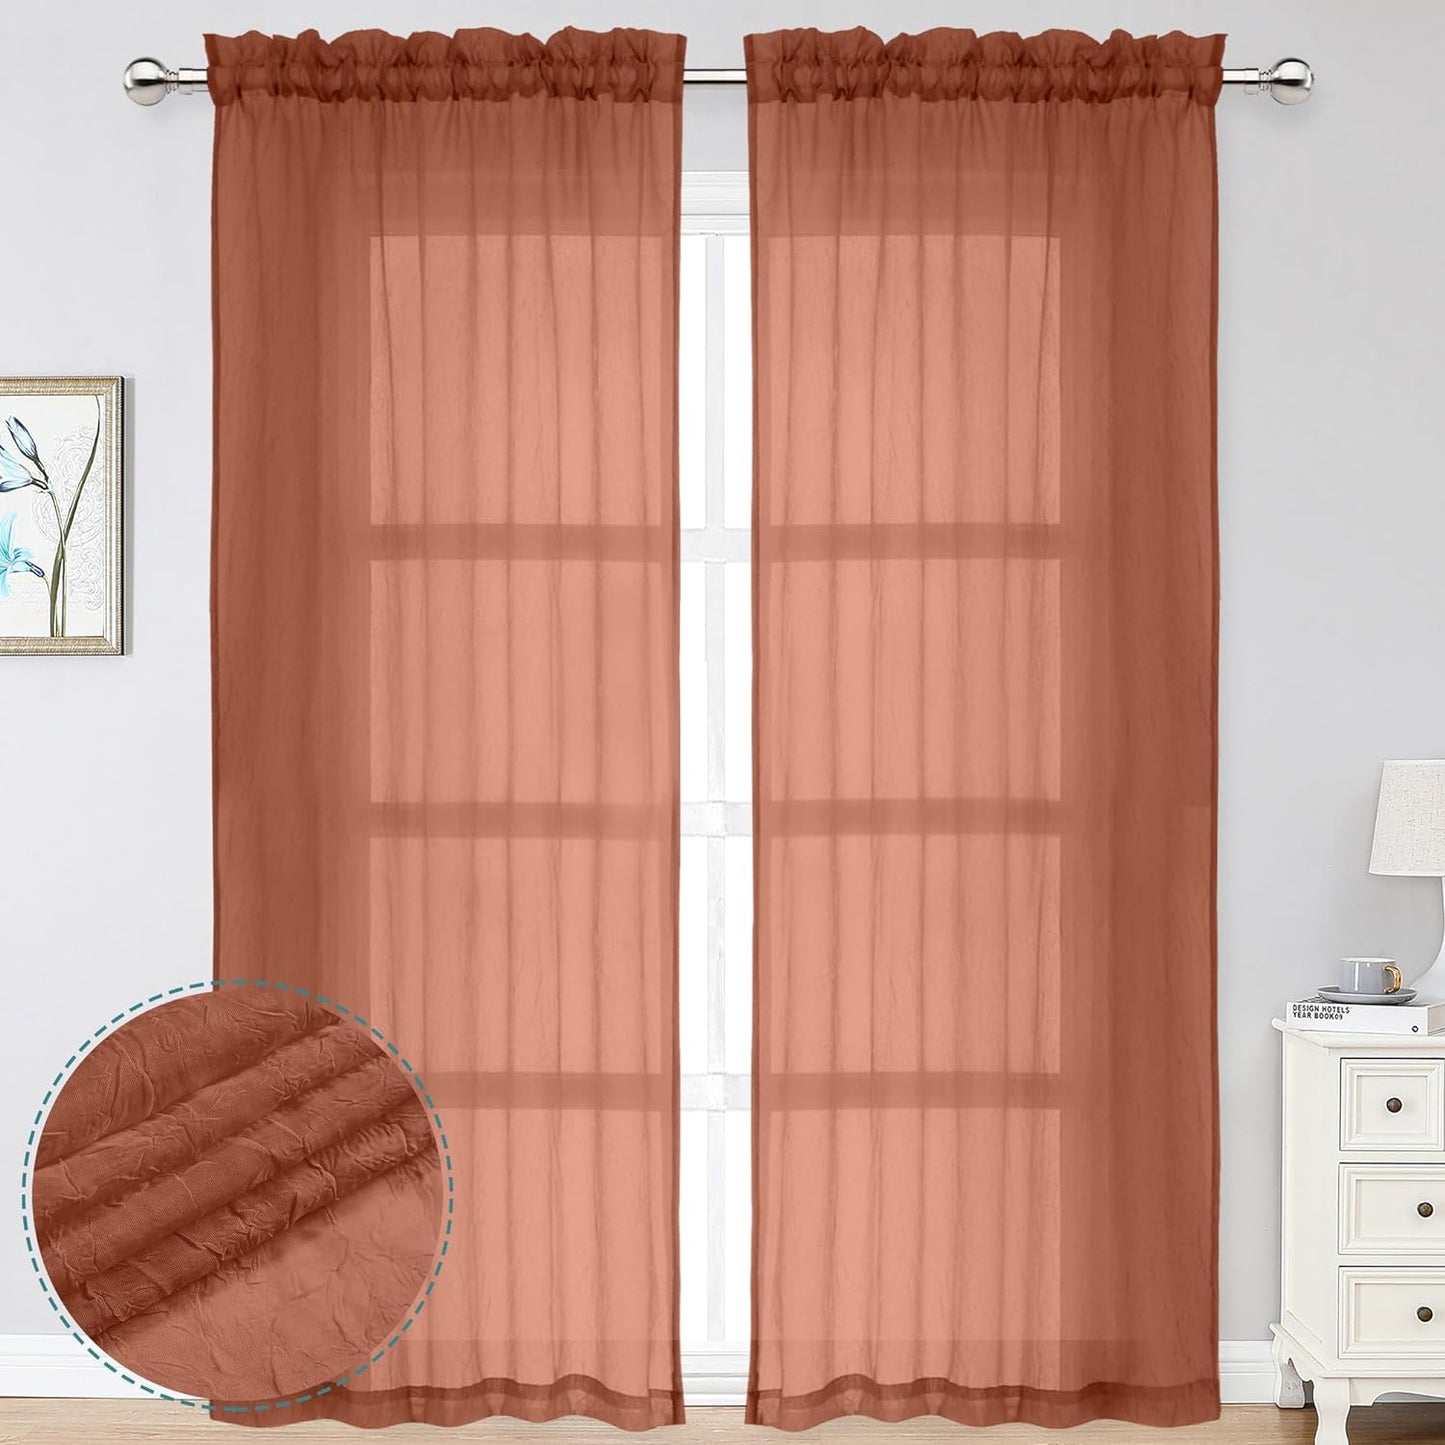 Crushed Sheer White Curtains 63 Inch Length 2 Panels, Light Filtering Solid Crinkle Voile Short Sheer Curtian for Bedroom Living Room, Each 42Wx63L Inches  Chyhomenyc Rust 40 W X 96 L 